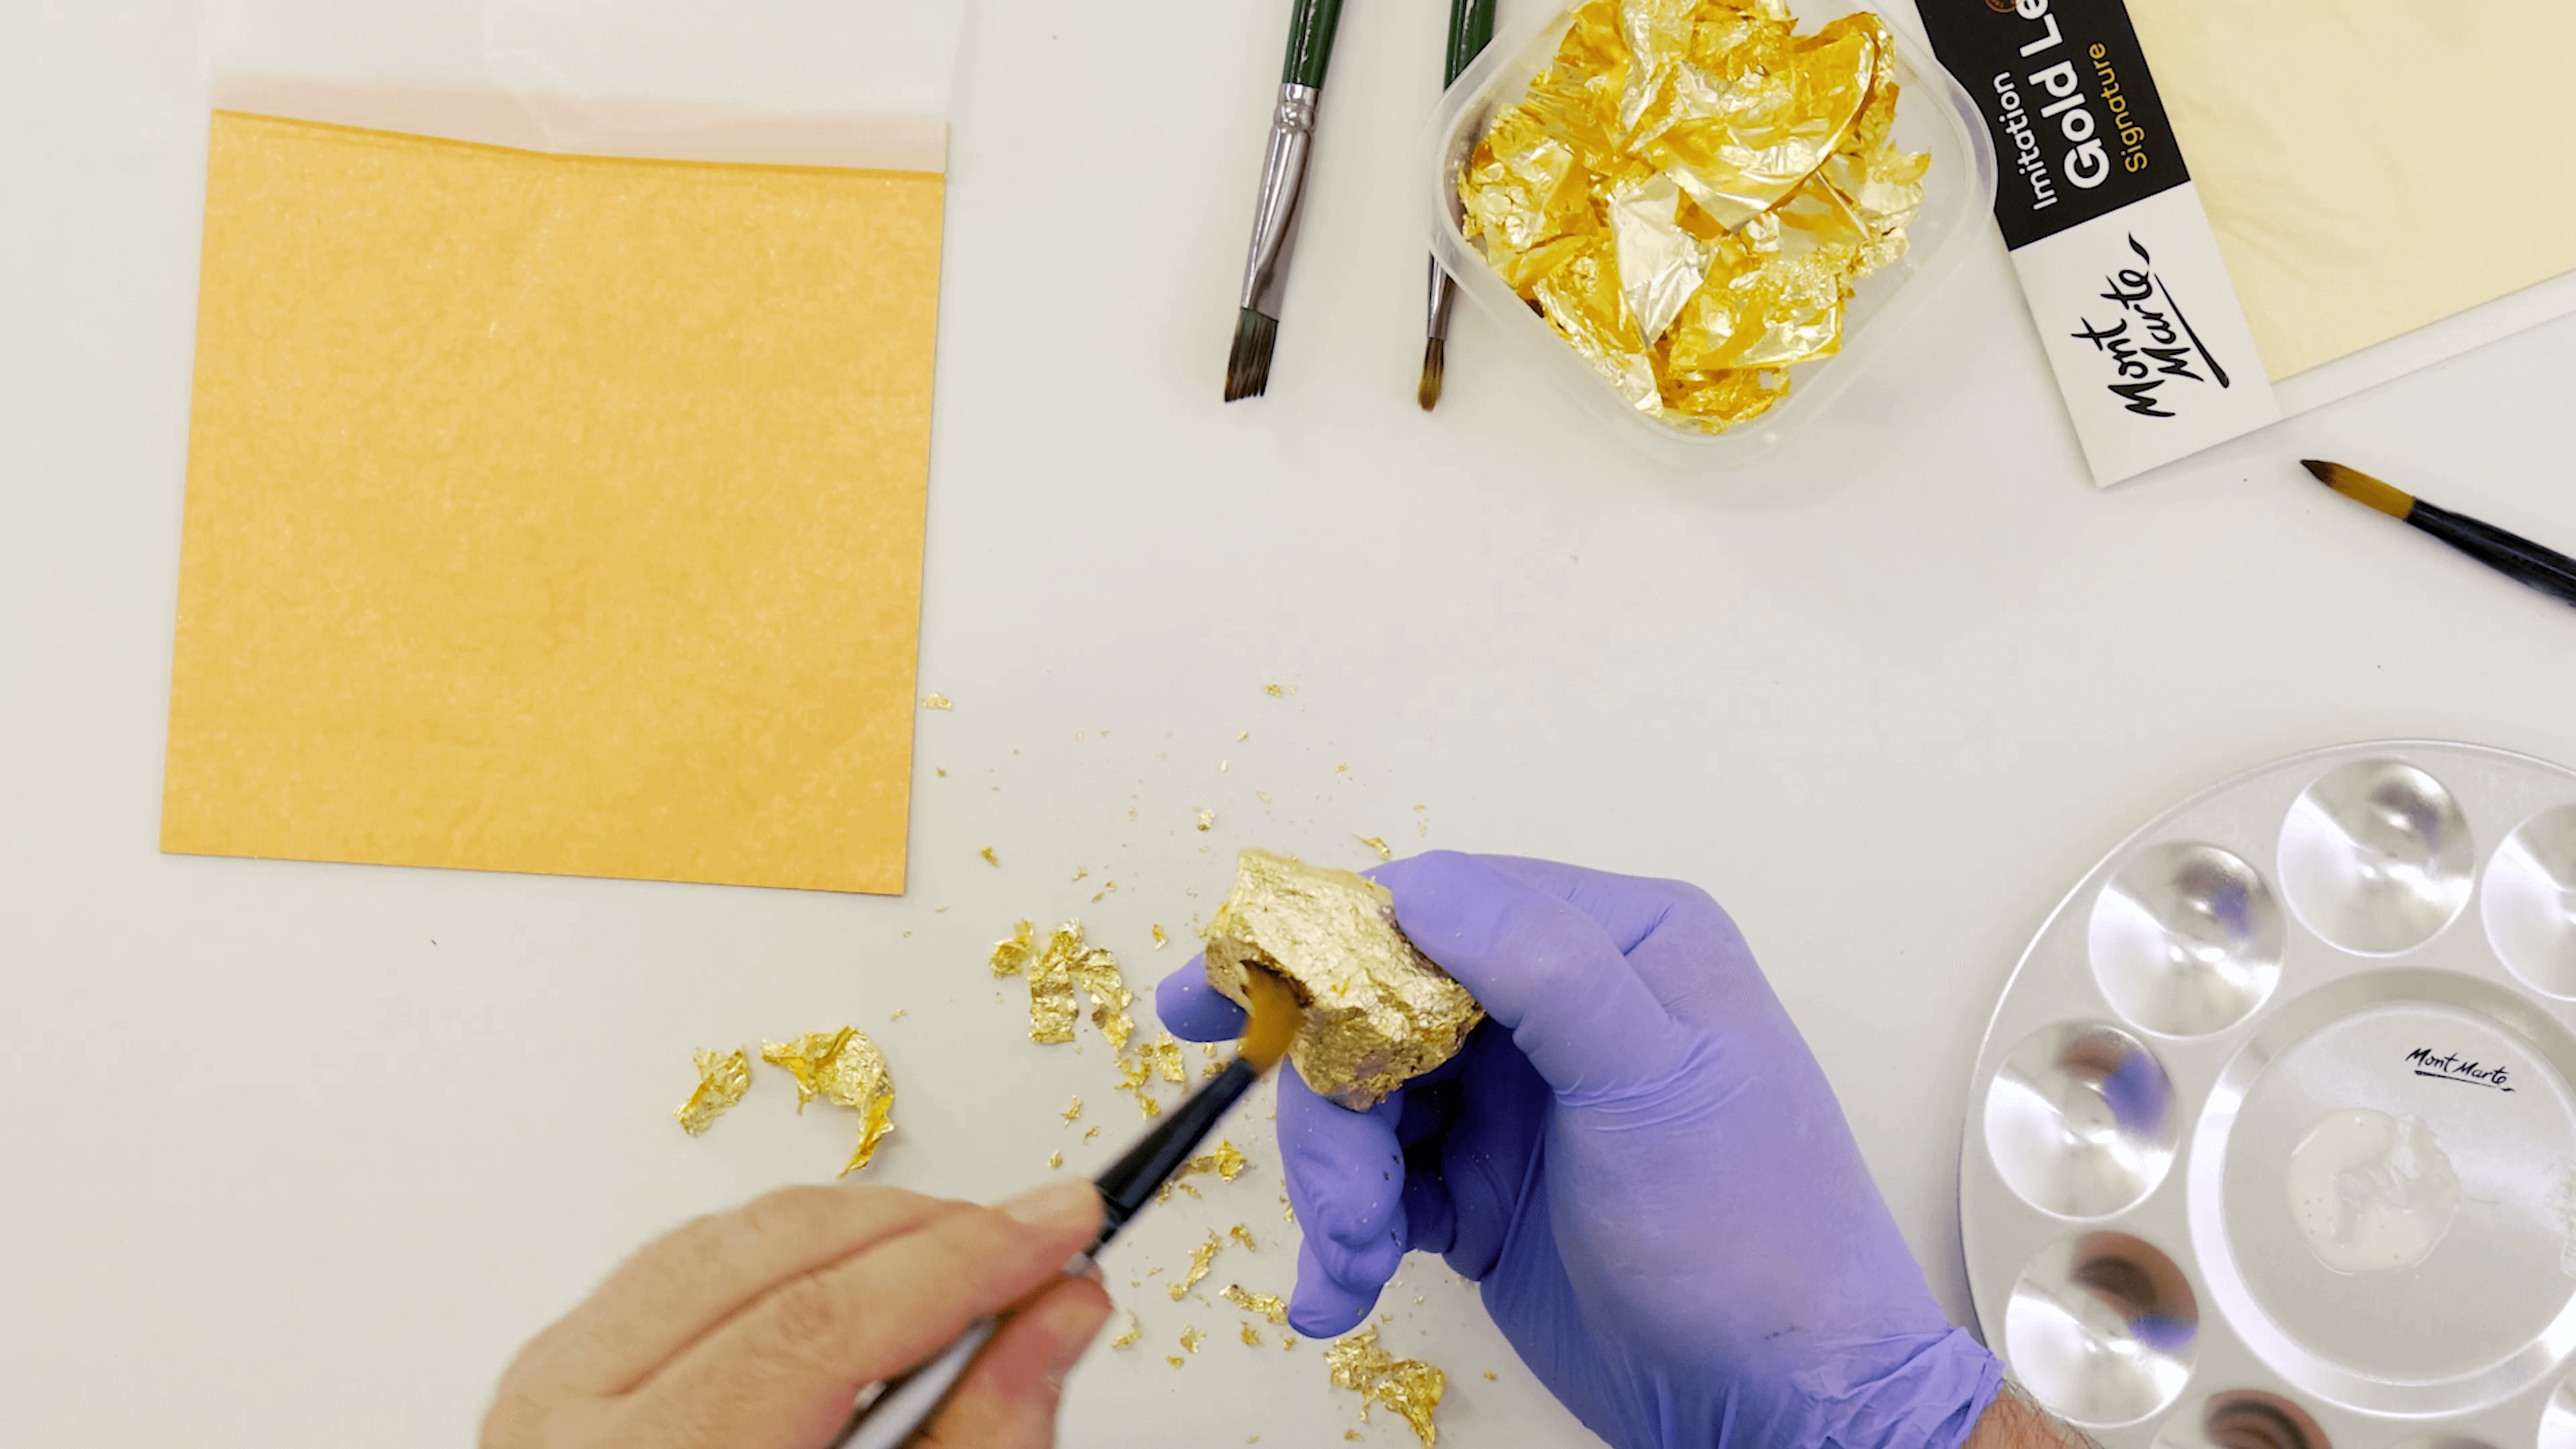 Using Gilding Adhesive and gold leaf foil on coasters or tumblers